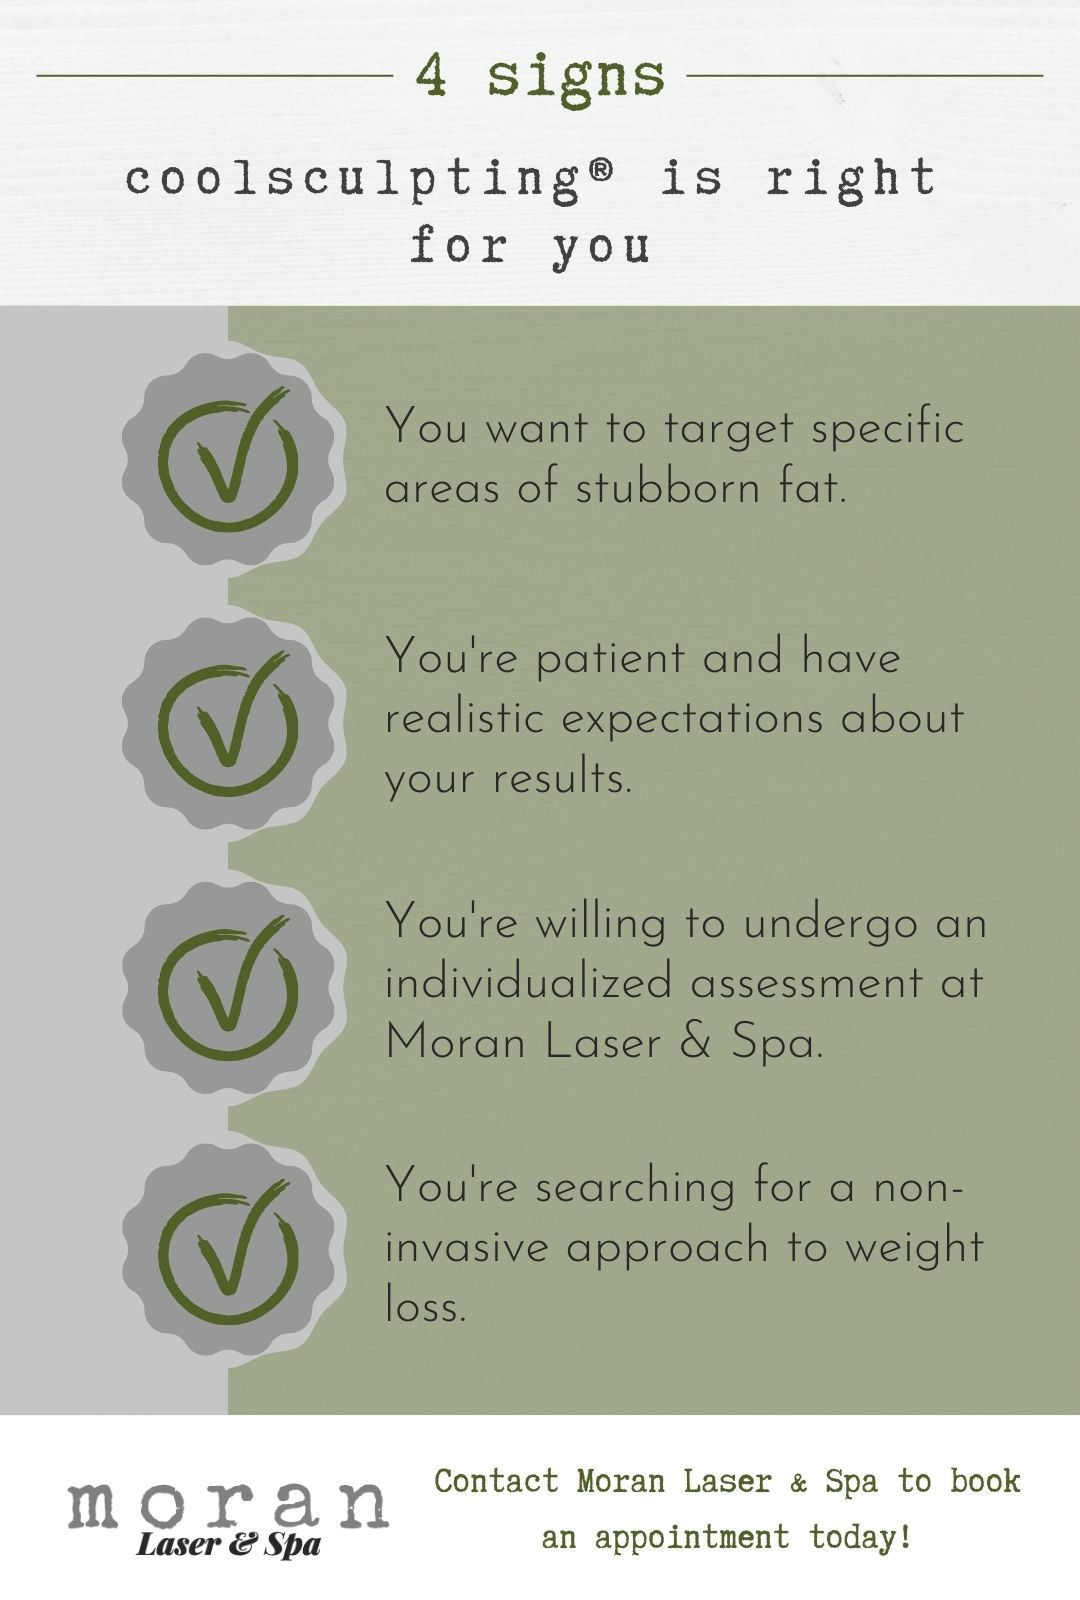 M24620 - Moran Laser and Spa - CoolSculpting® Is It Right for You.jpg